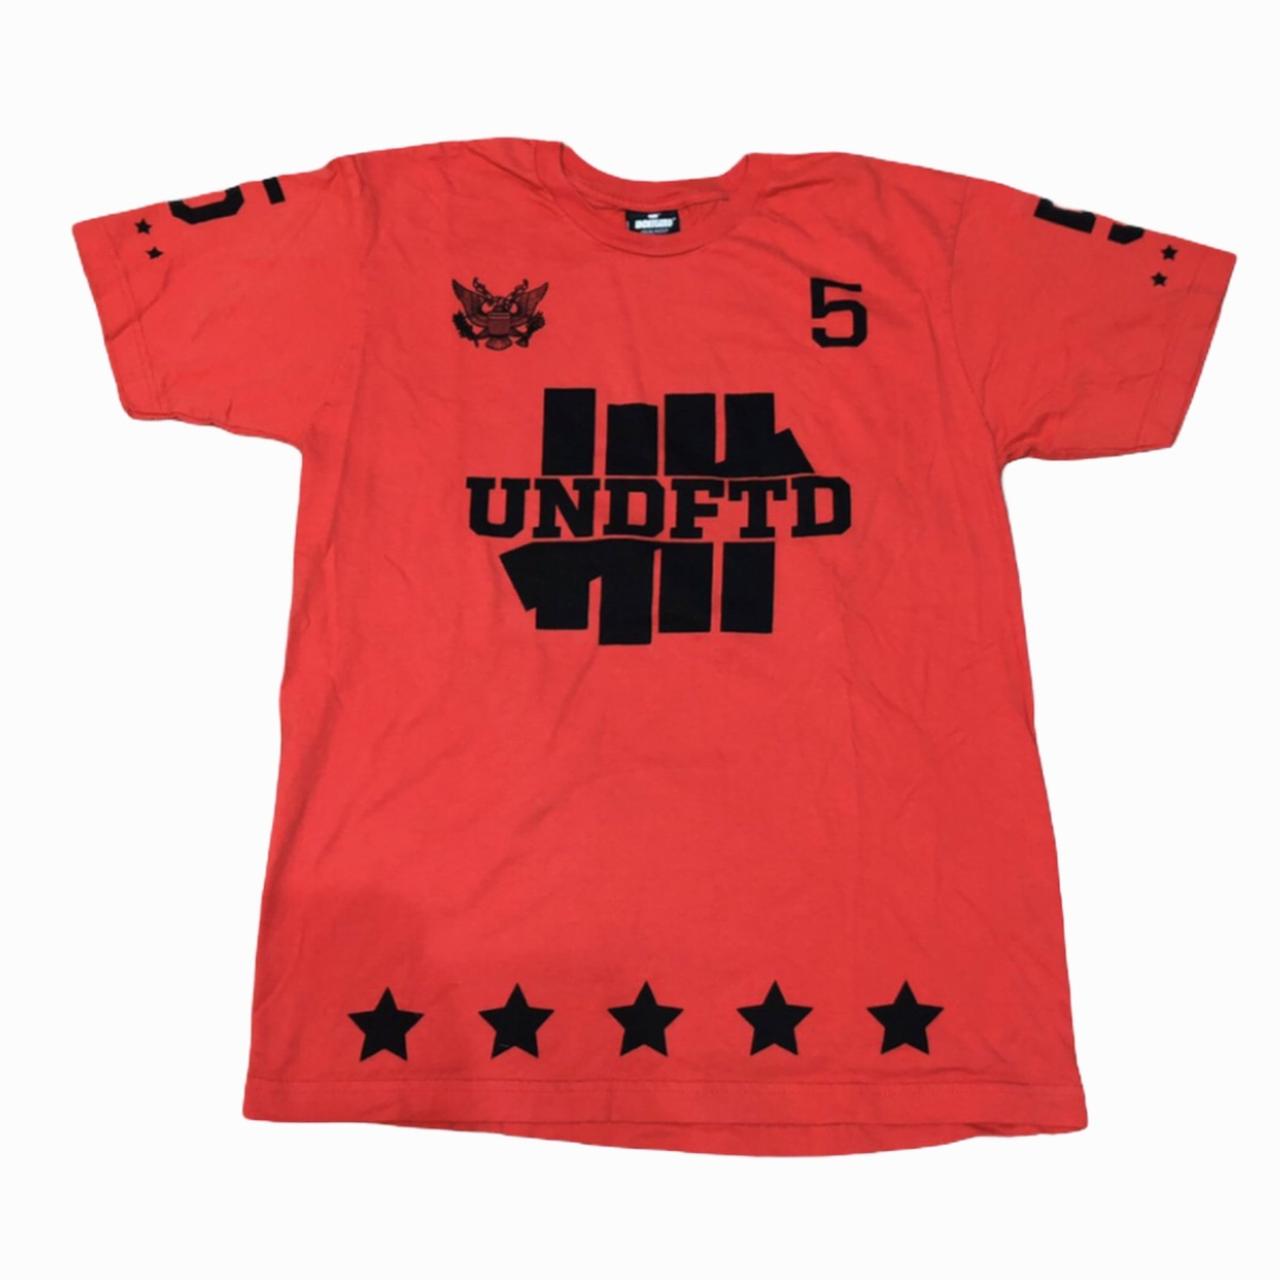 Product Image 1 - Undefeated General Tshirt 
Size: L